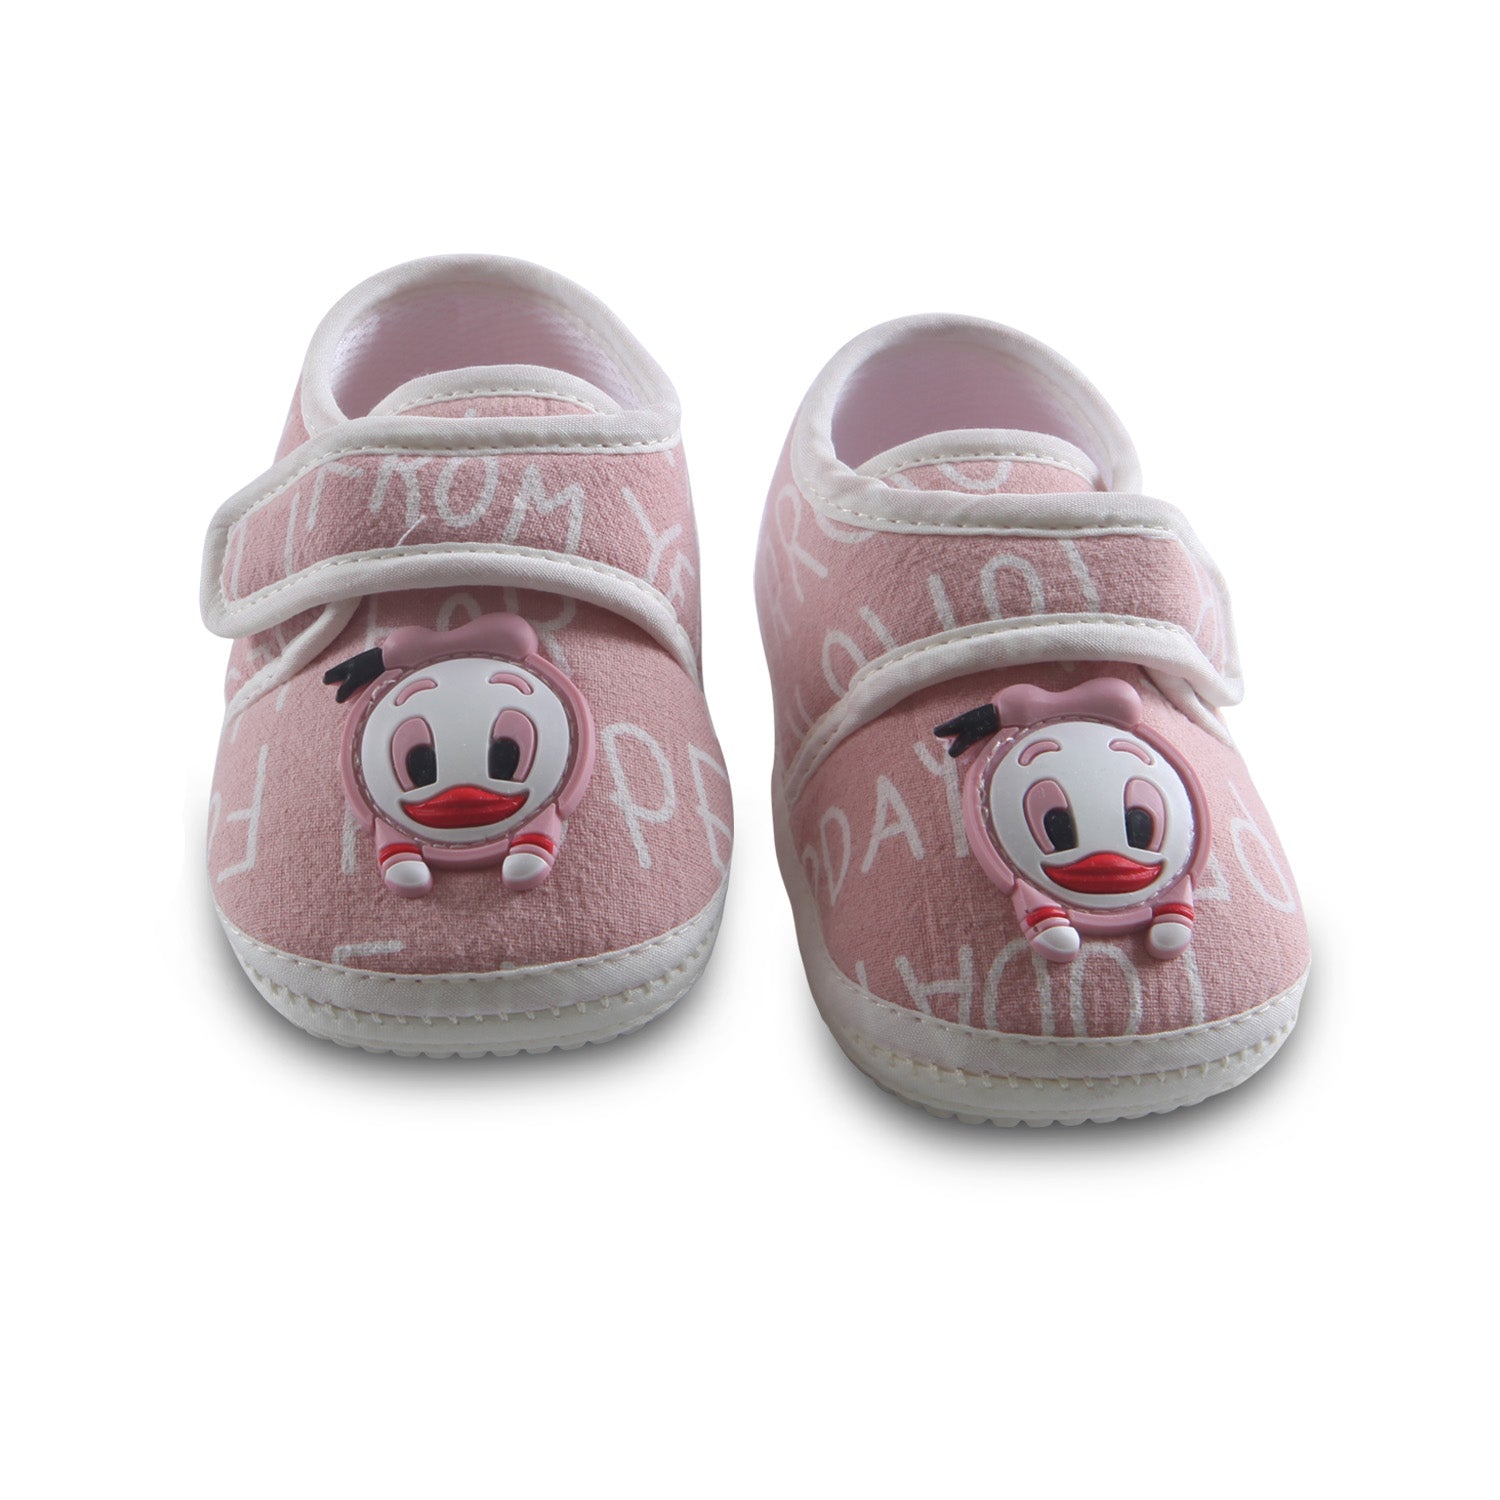 Non-slip Booties with Strap Kids Shoes Duck - Mauve - Baby Moo